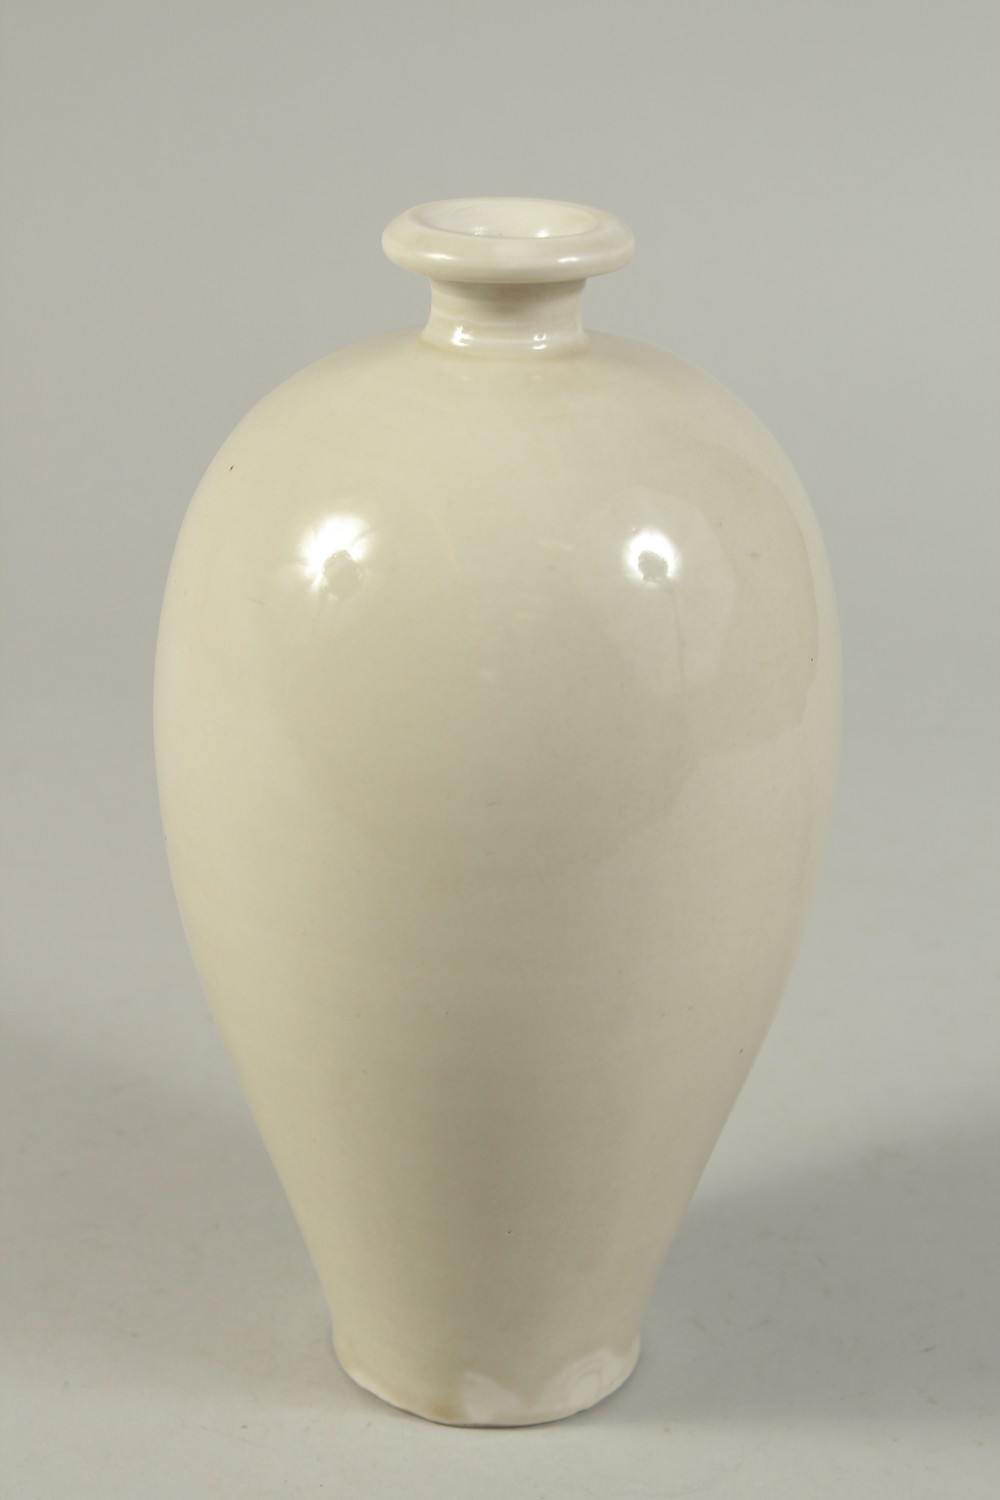 A CHINESE WHITE GLAZED DING WARE MEIPING VASE. 20.5cms high. - Image 3 of 5